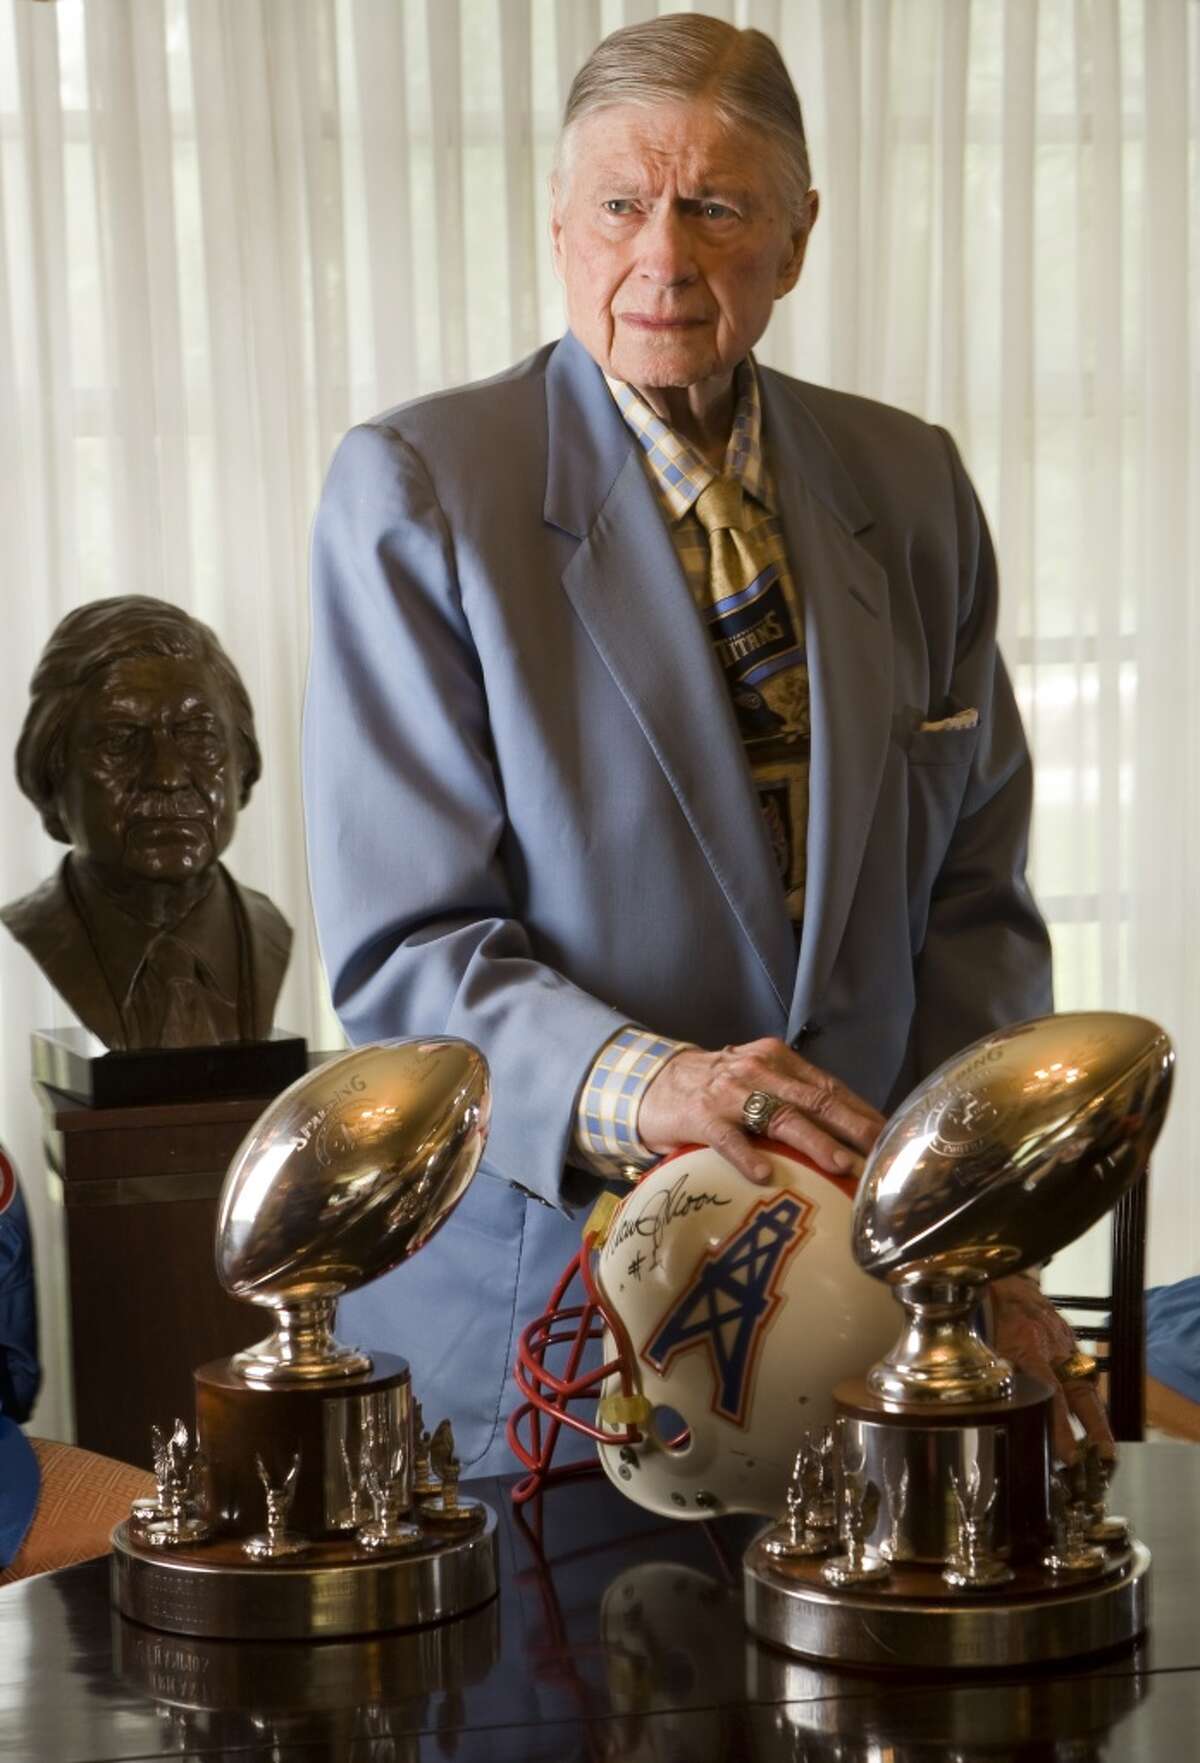 Bud Adams poses for a photo at his Houston home in 2009. Adams died on Oct. 21, 2013. He was 90 years old.